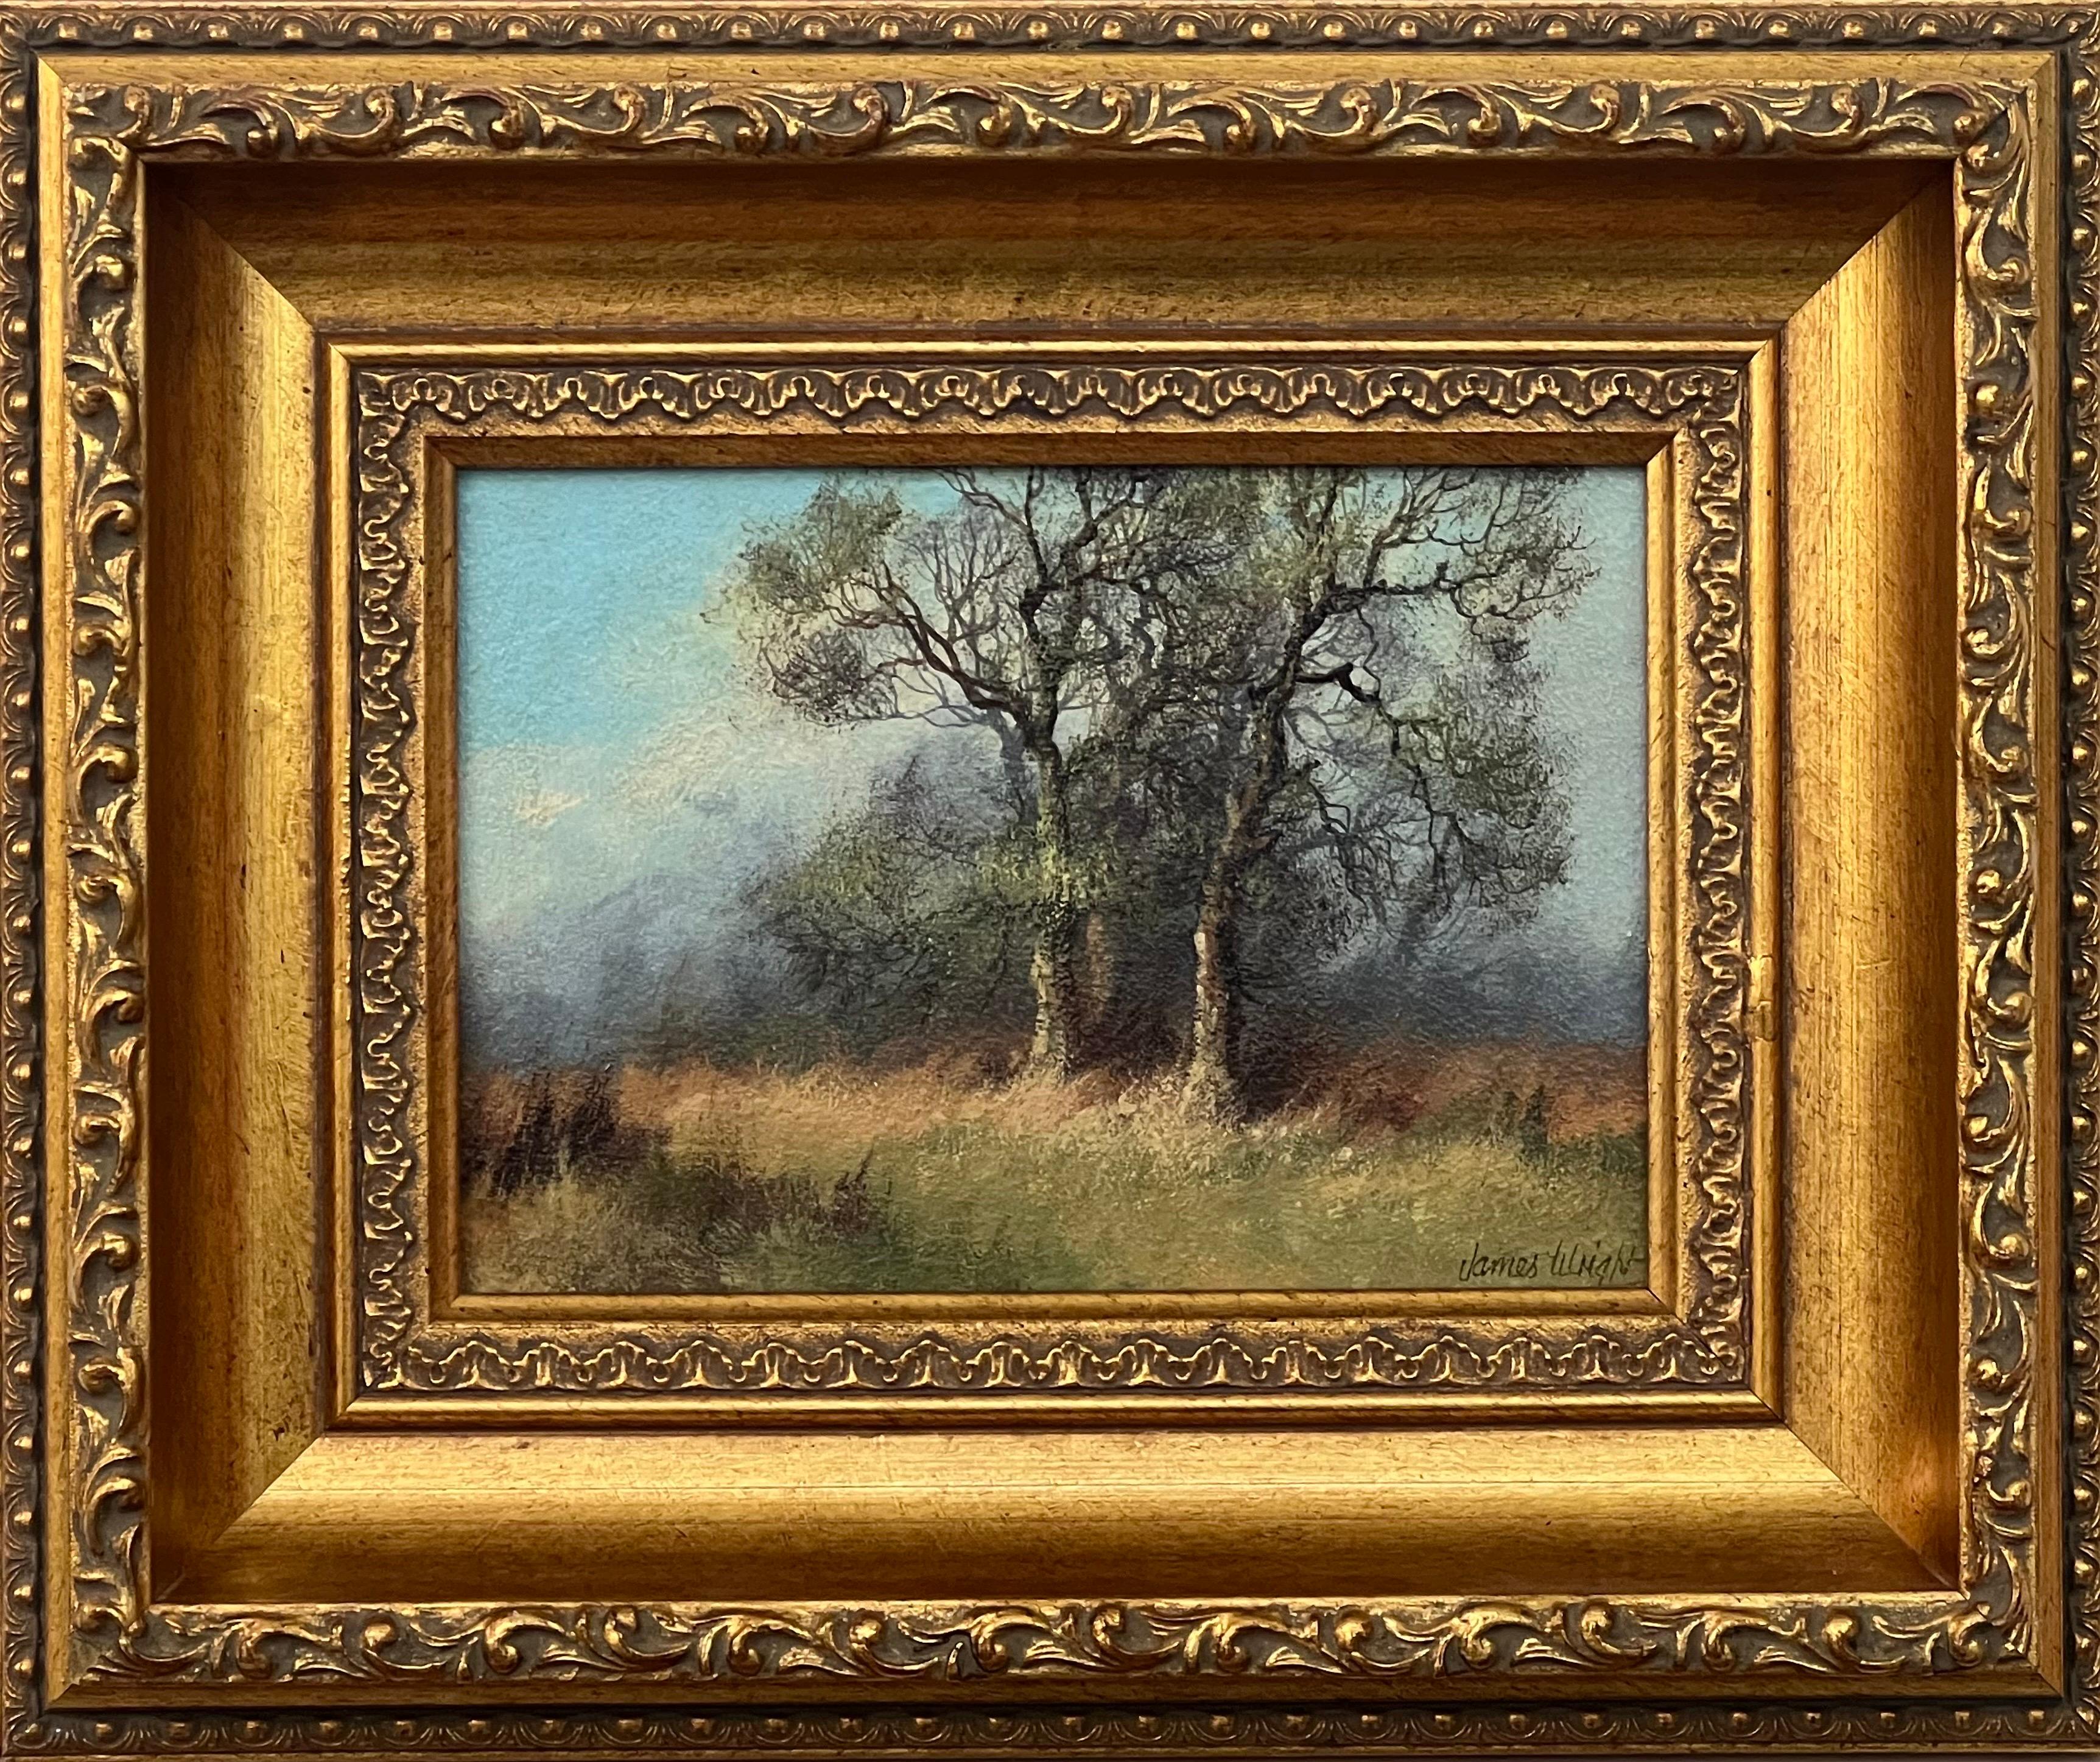 James Wright Landscape Painting - Tree Study & Field in the English Countryside by 20th Century Landscape Artist